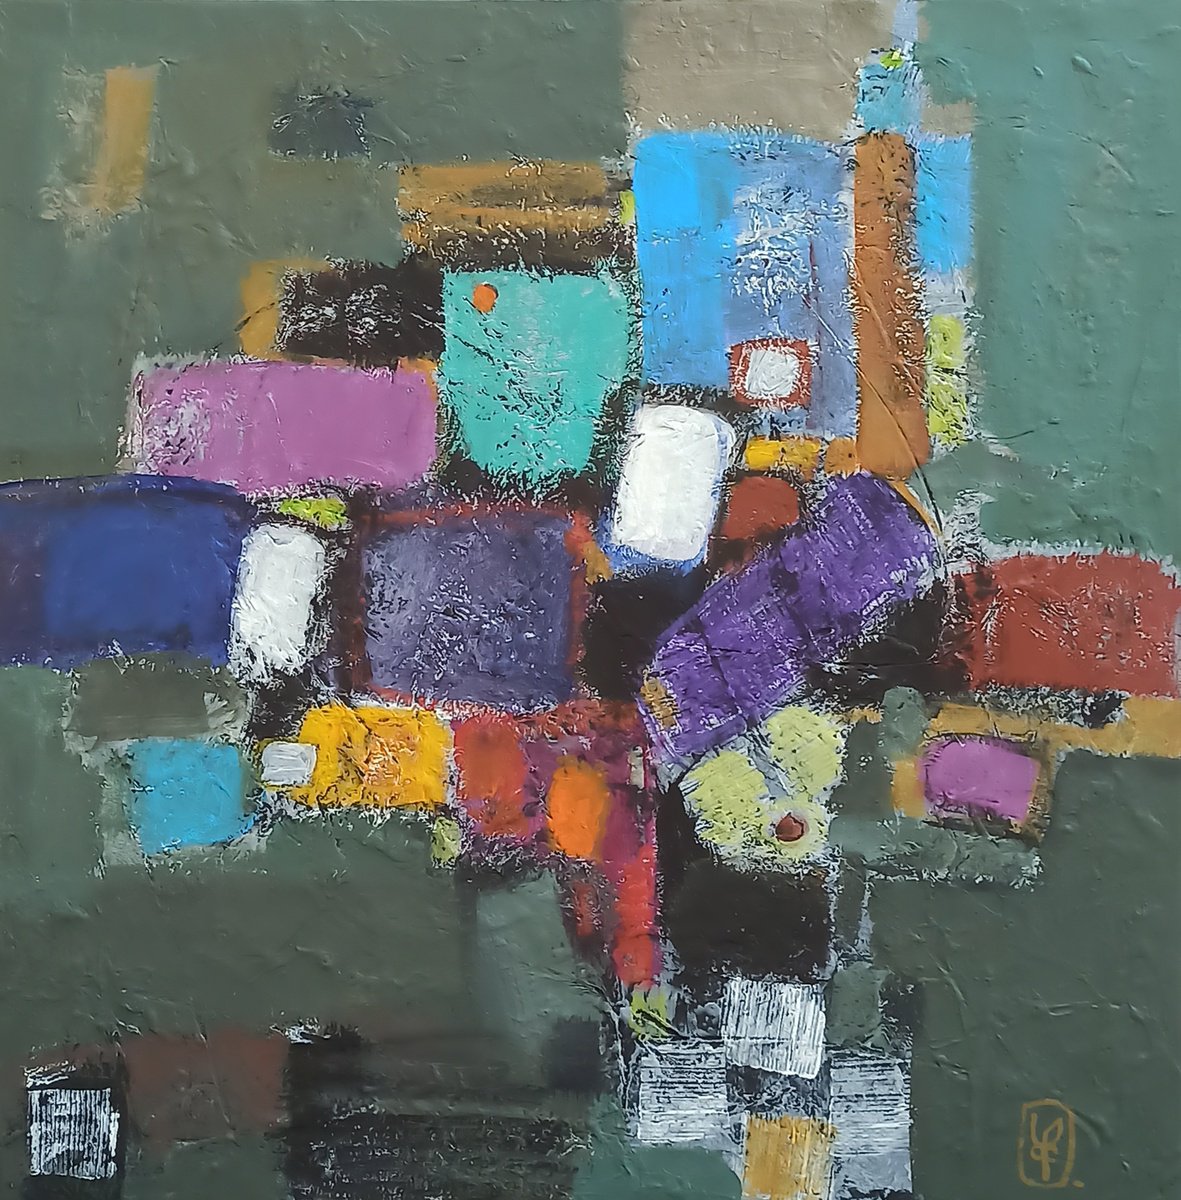 Abstraction-8 (60x60cm, oil painting, palette knife) by Abgar Khacahtryan